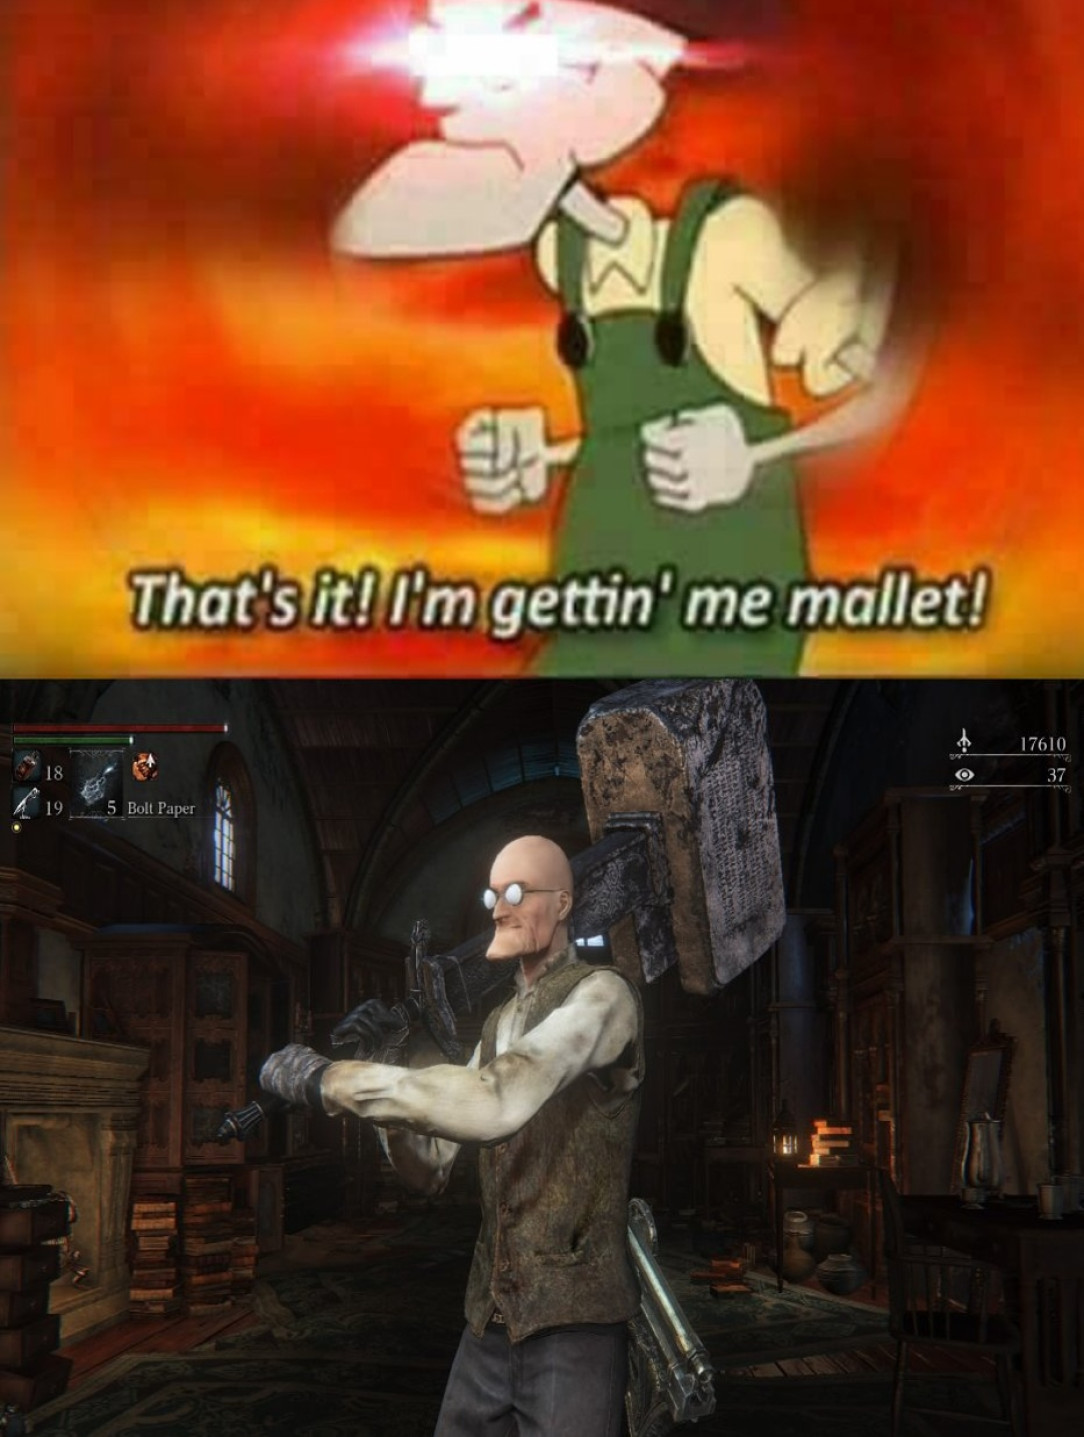 Eustace, the Mallet of Malice